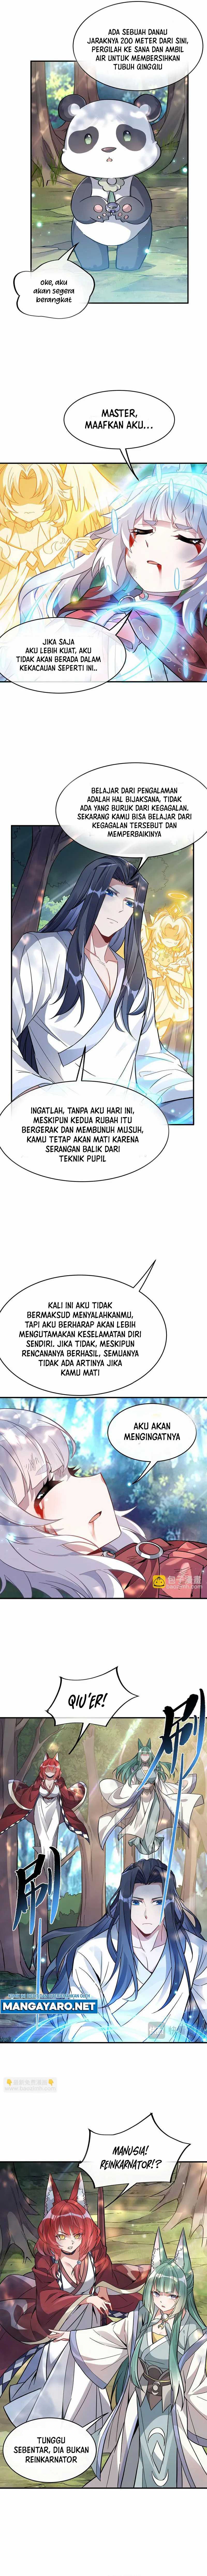 Dilarang COPAS - situs resmi www.mangacanblog.com - Komik my female apprentices are all big shots from the future 221 - chapter 221 222 Indonesia my female apprentices are all big shots from the future 221 - chapter 221 Terbaru 5|Baca Manga Komik Indonesia|Mangacan